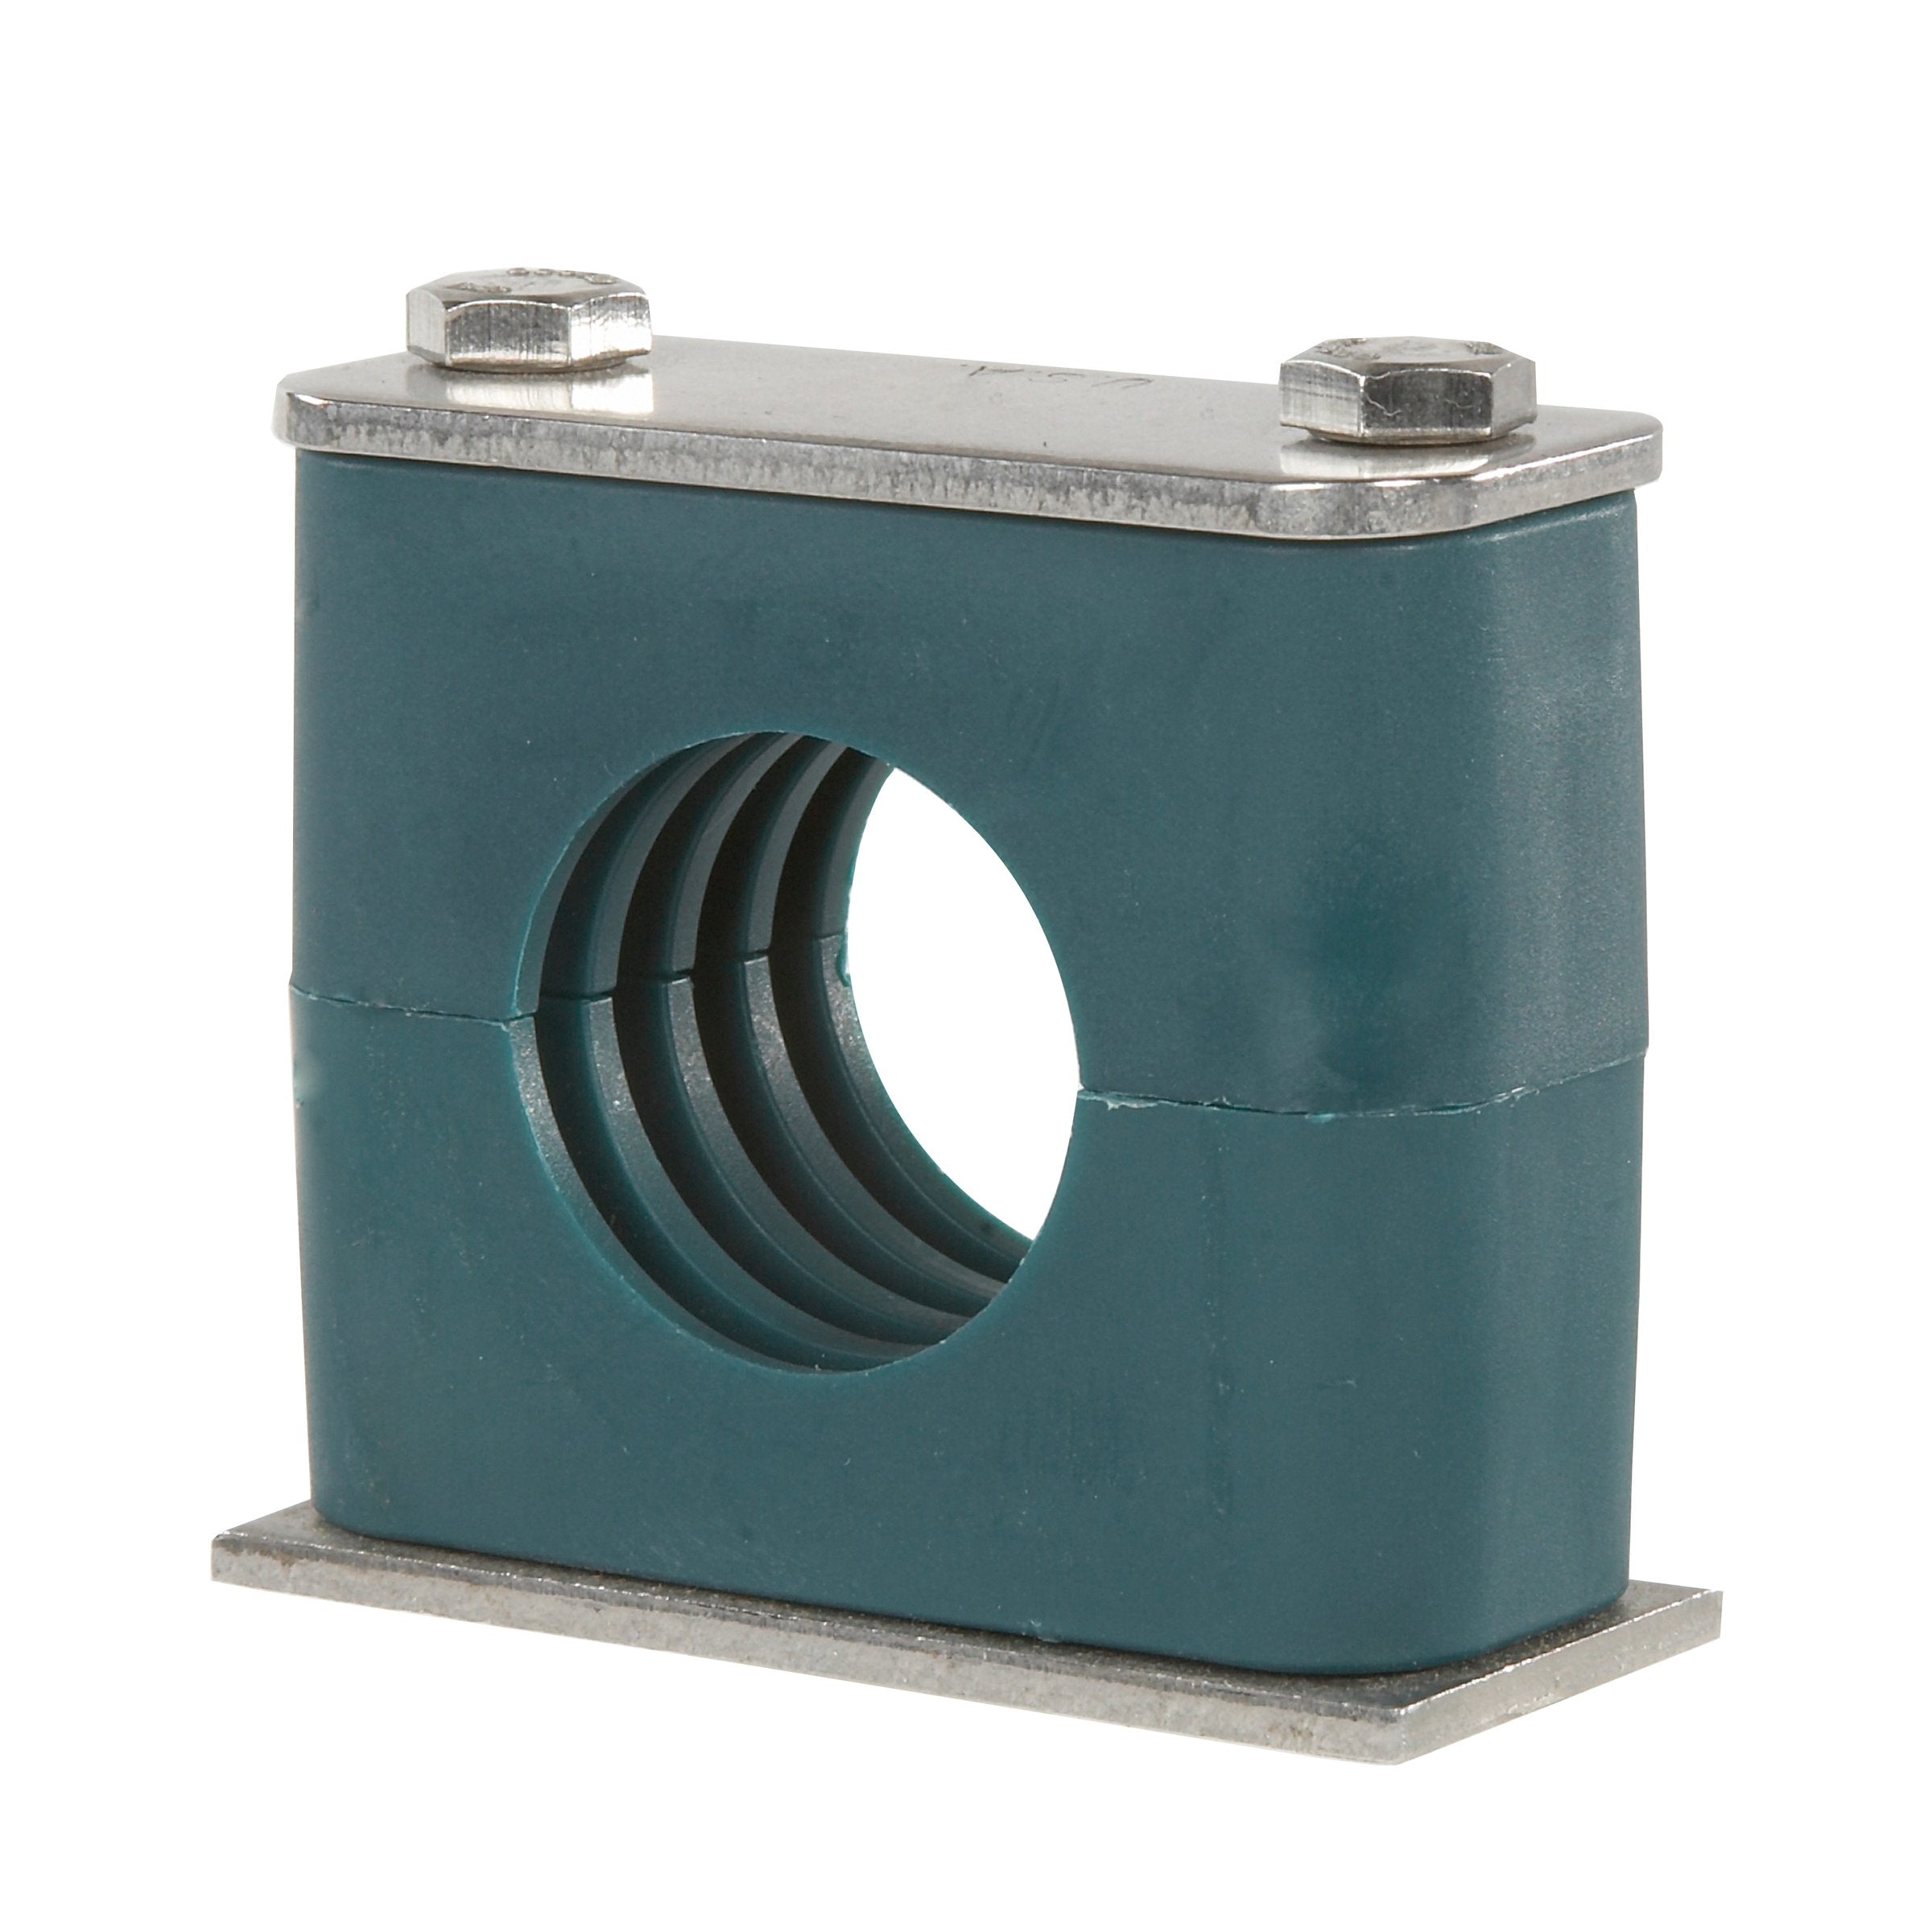 SP-763.5-PP-DP-AS-U-W10 : Stauff Clamp, Single Weld Plate, 2.5 inch (63.5mm) OD, for 2.5" Tube, Green PP Insert, Profiled Interior, Carbon Steel